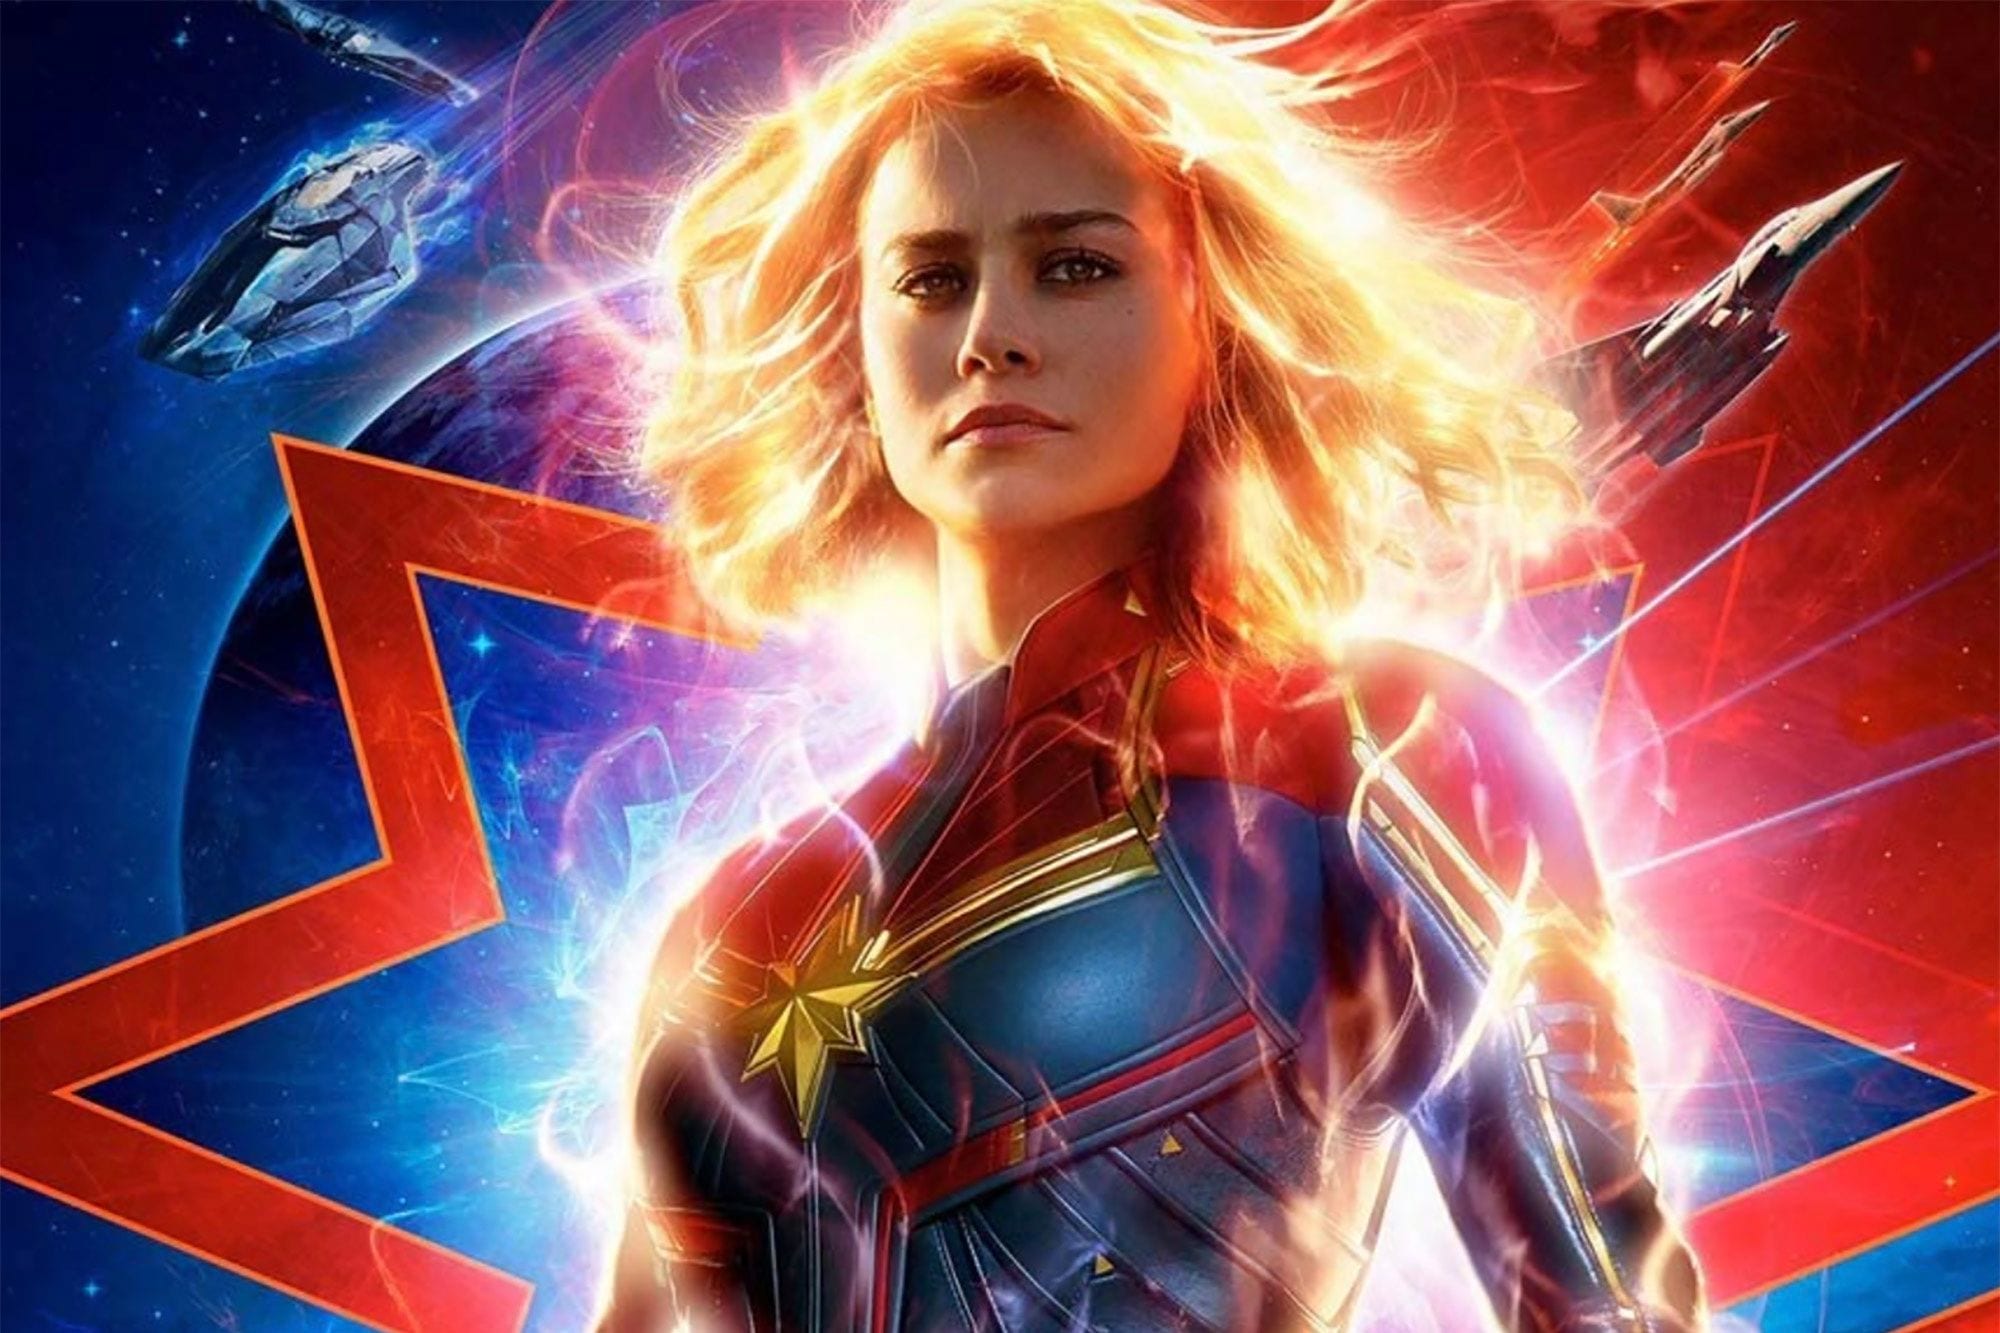 ‘Captain Marvel’ Sends a Powerful Message to Audiences and Filmmakers